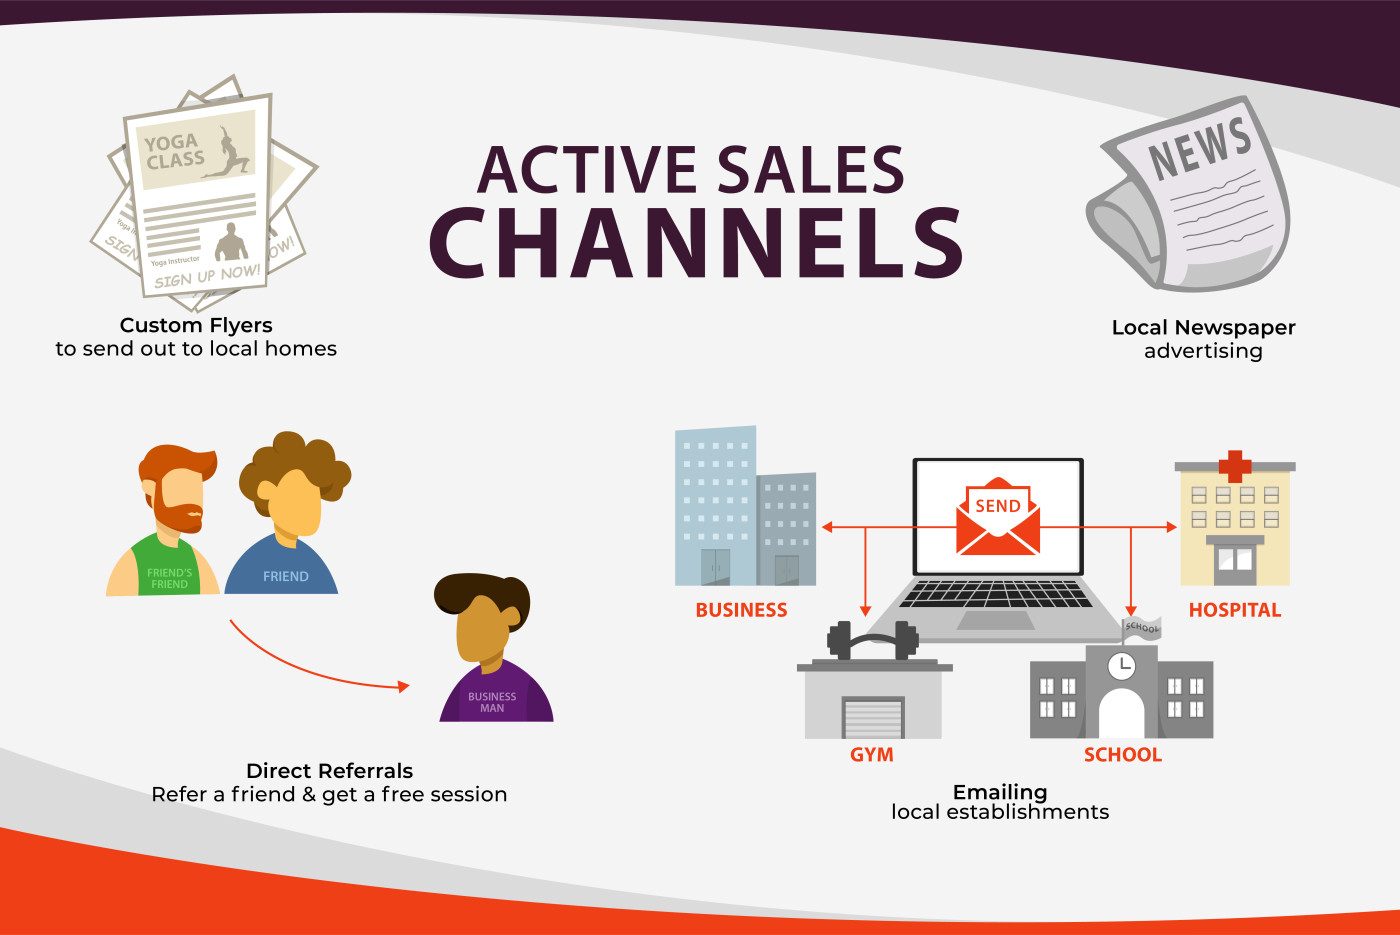 An infographic illustrating active sales channels